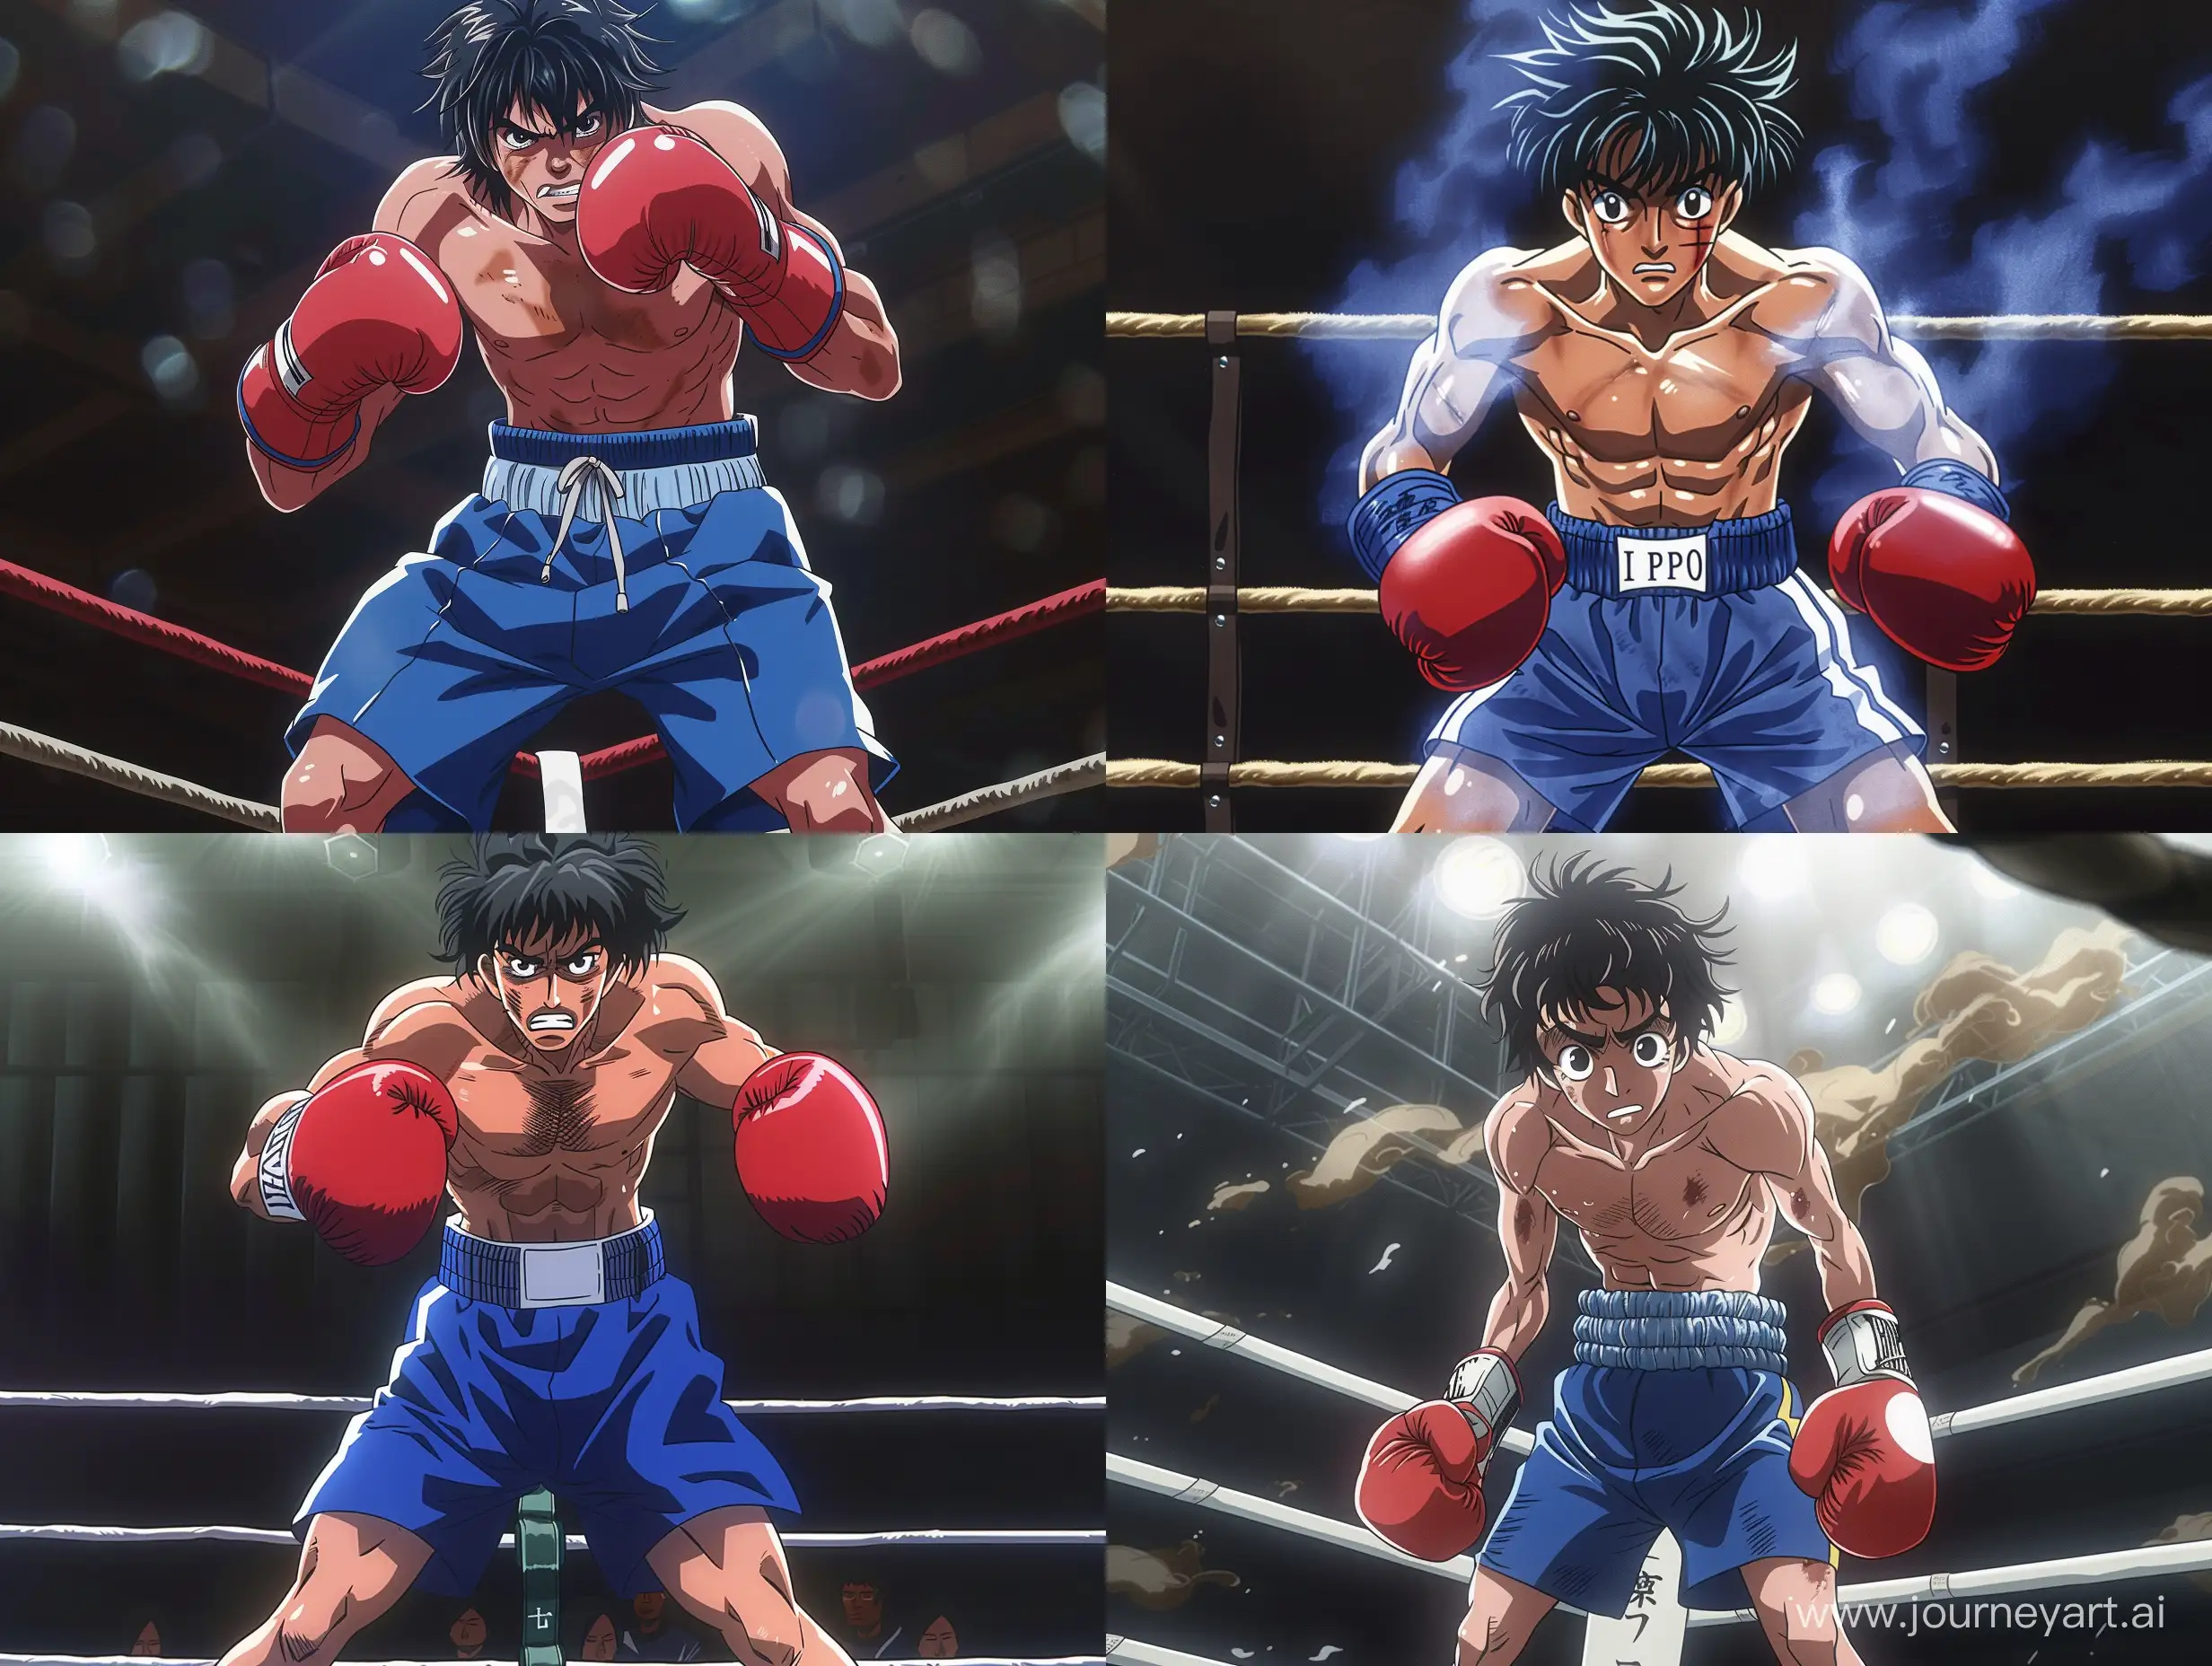 Ippo-Makunouchi-the-Determined-Boxer-in-Blue-Shorts-and-Red-Gloves